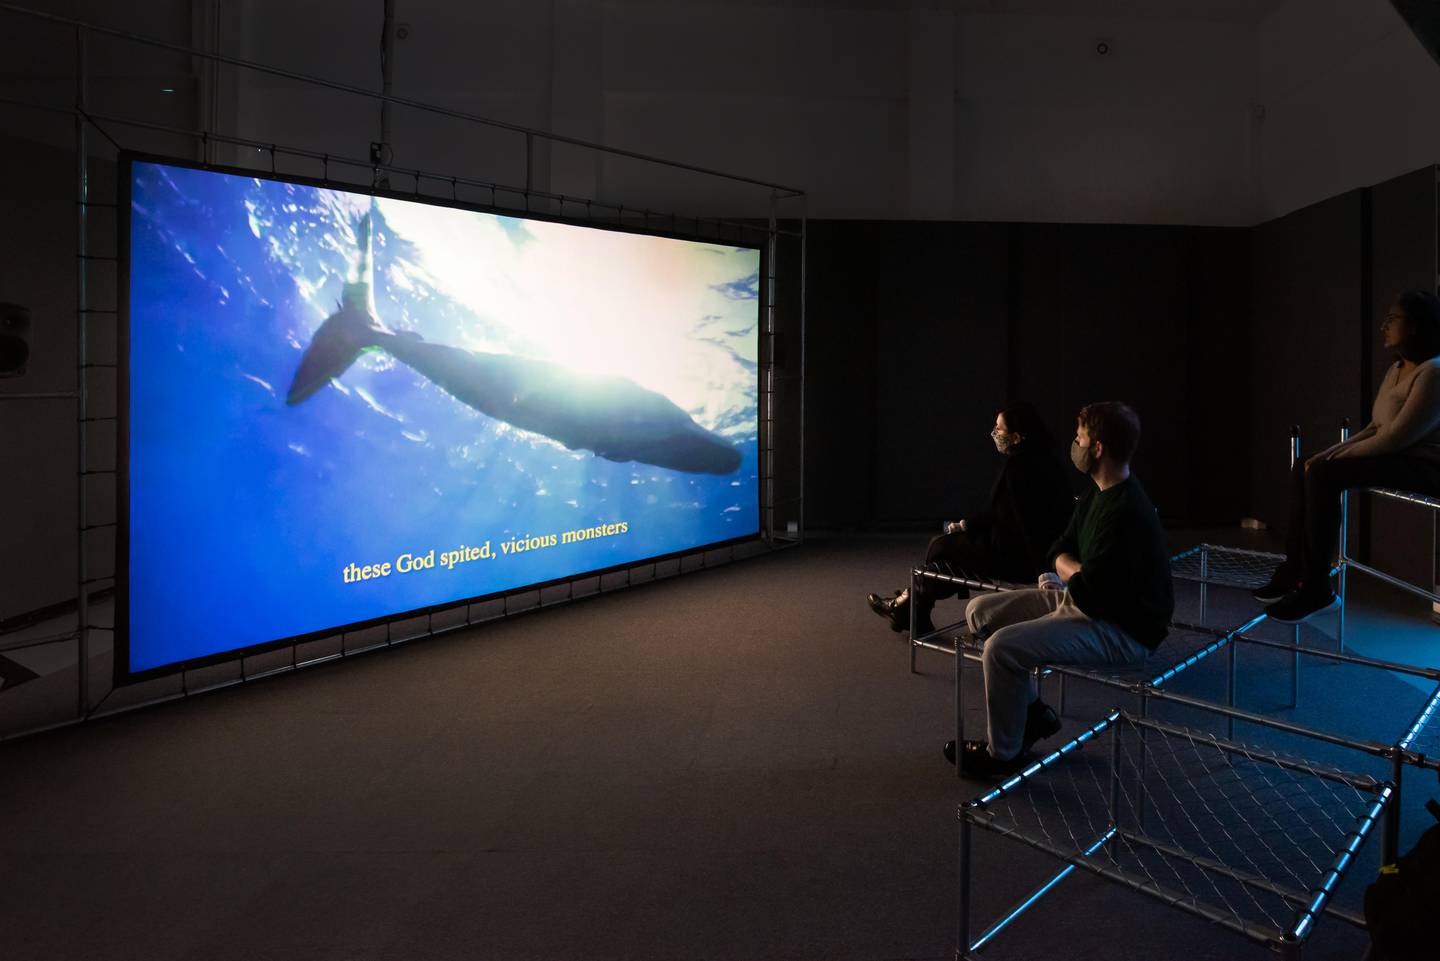 Sperm whales in Haig Aivazian's video 'All of Your Stars Are but Dust on My Shoes' (2021). Their large sacs of oil, stored in their heads, were prized sources of oil before the invention of electricity. Photo: The Showroom, Haig Aivazian, Max Colson